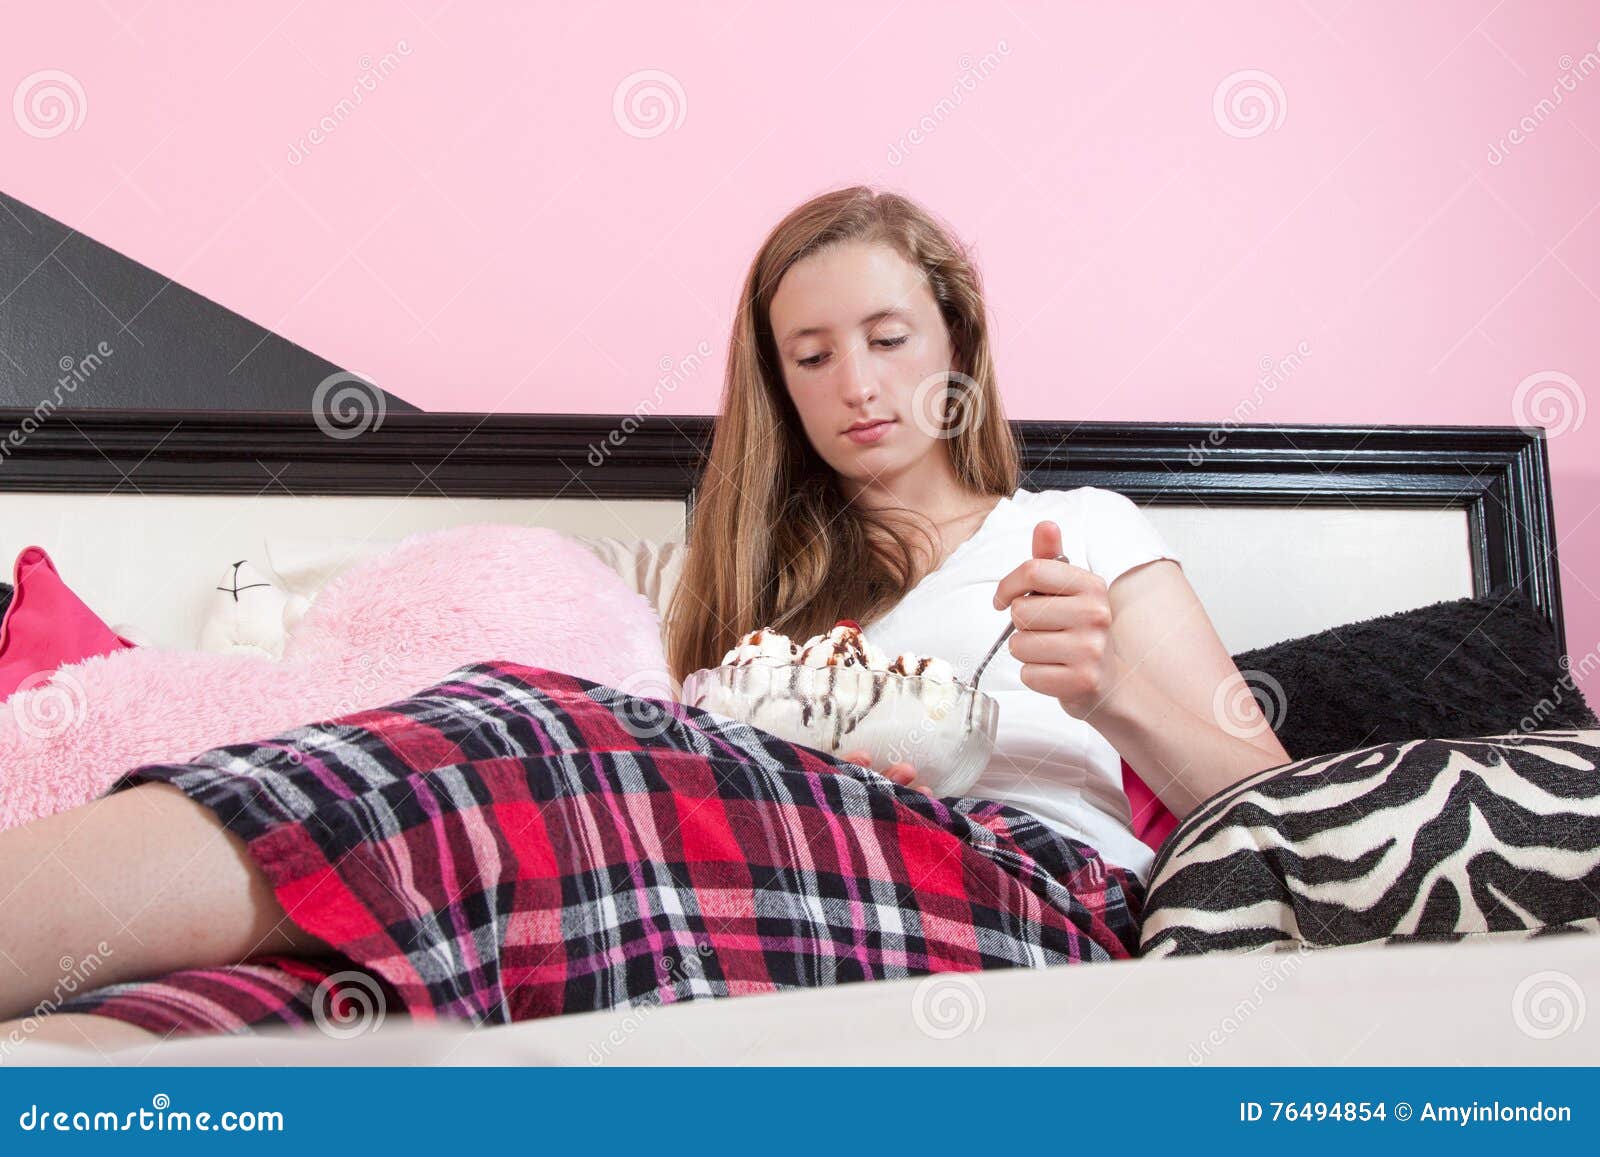 Unhappy Teen Eating Large Ice Cream Sundae In Her Room Stock